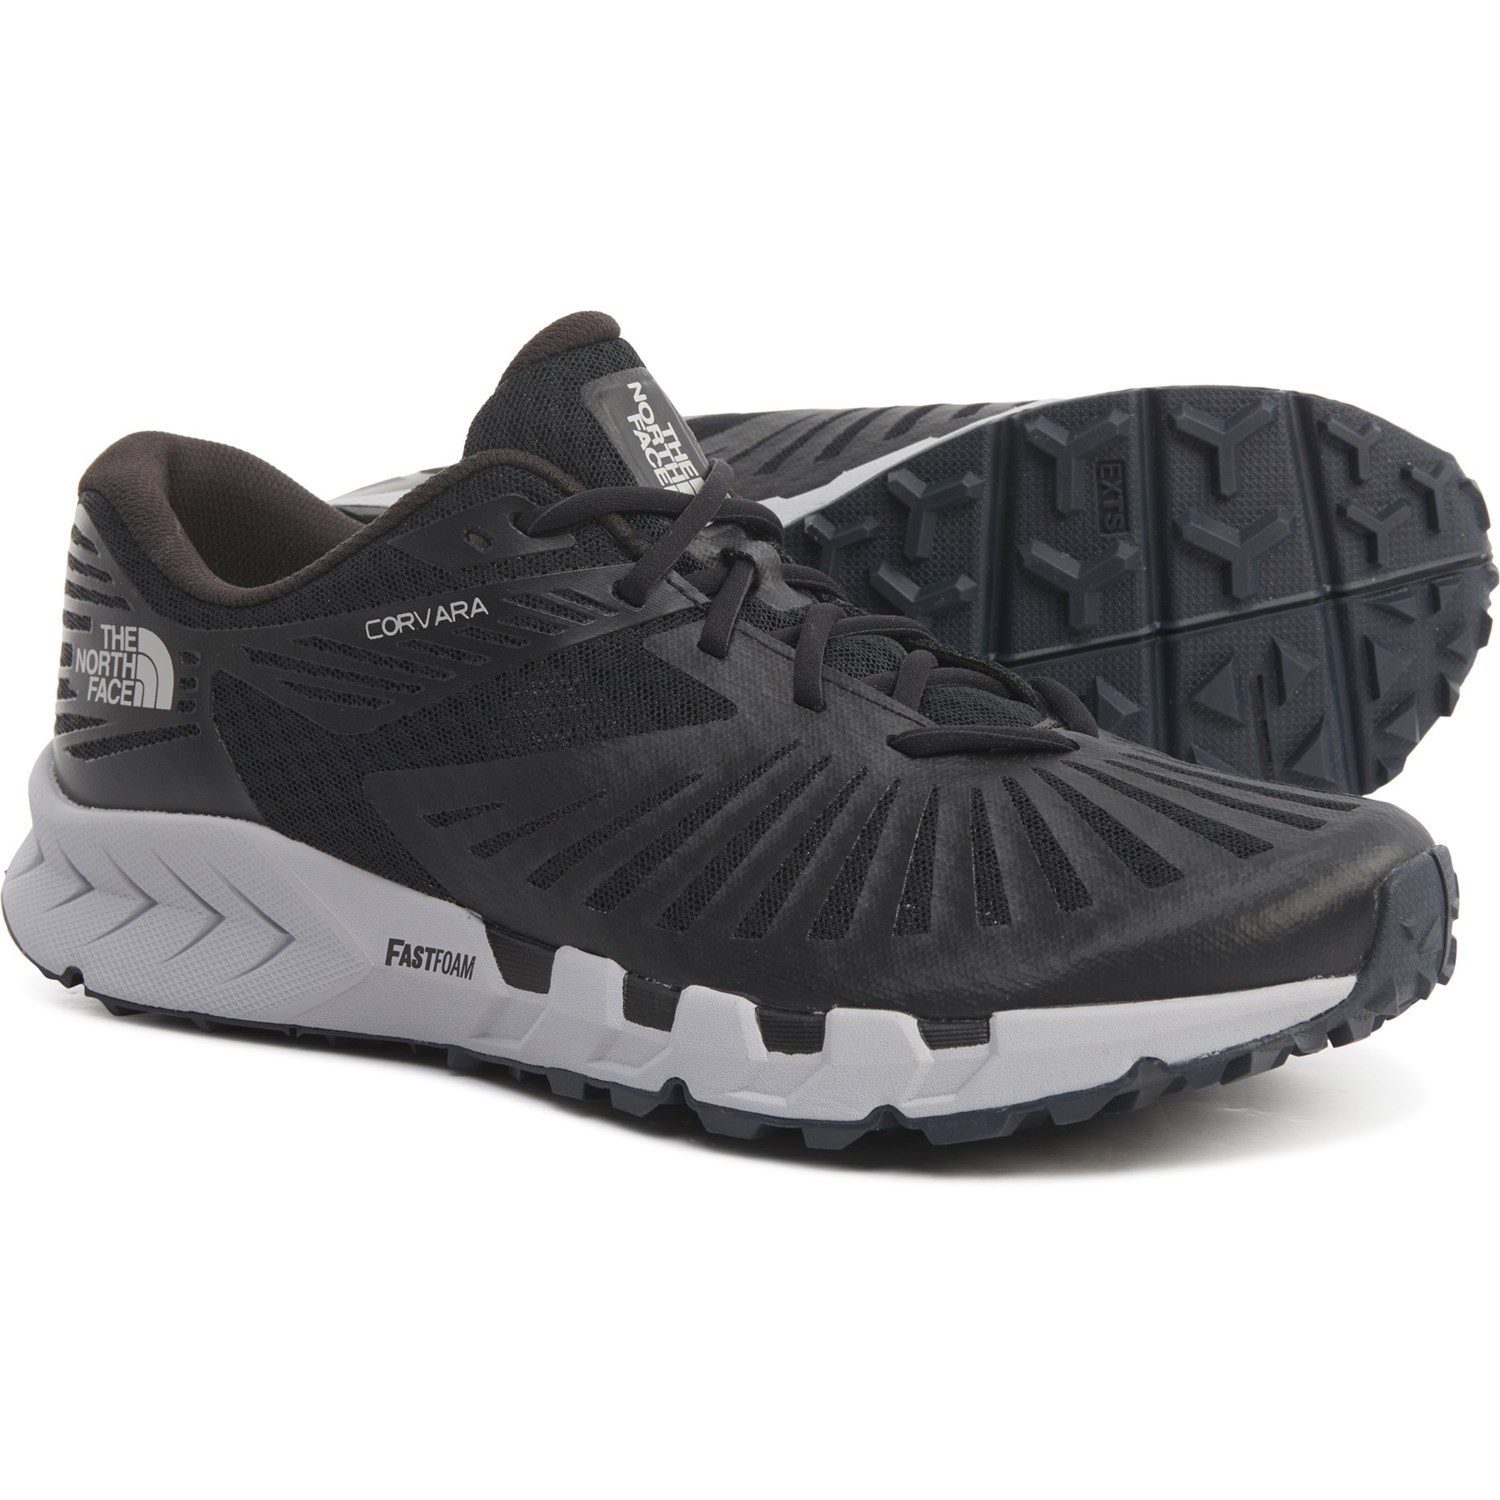 The North Face Corvara Trail Running Shoes For Men